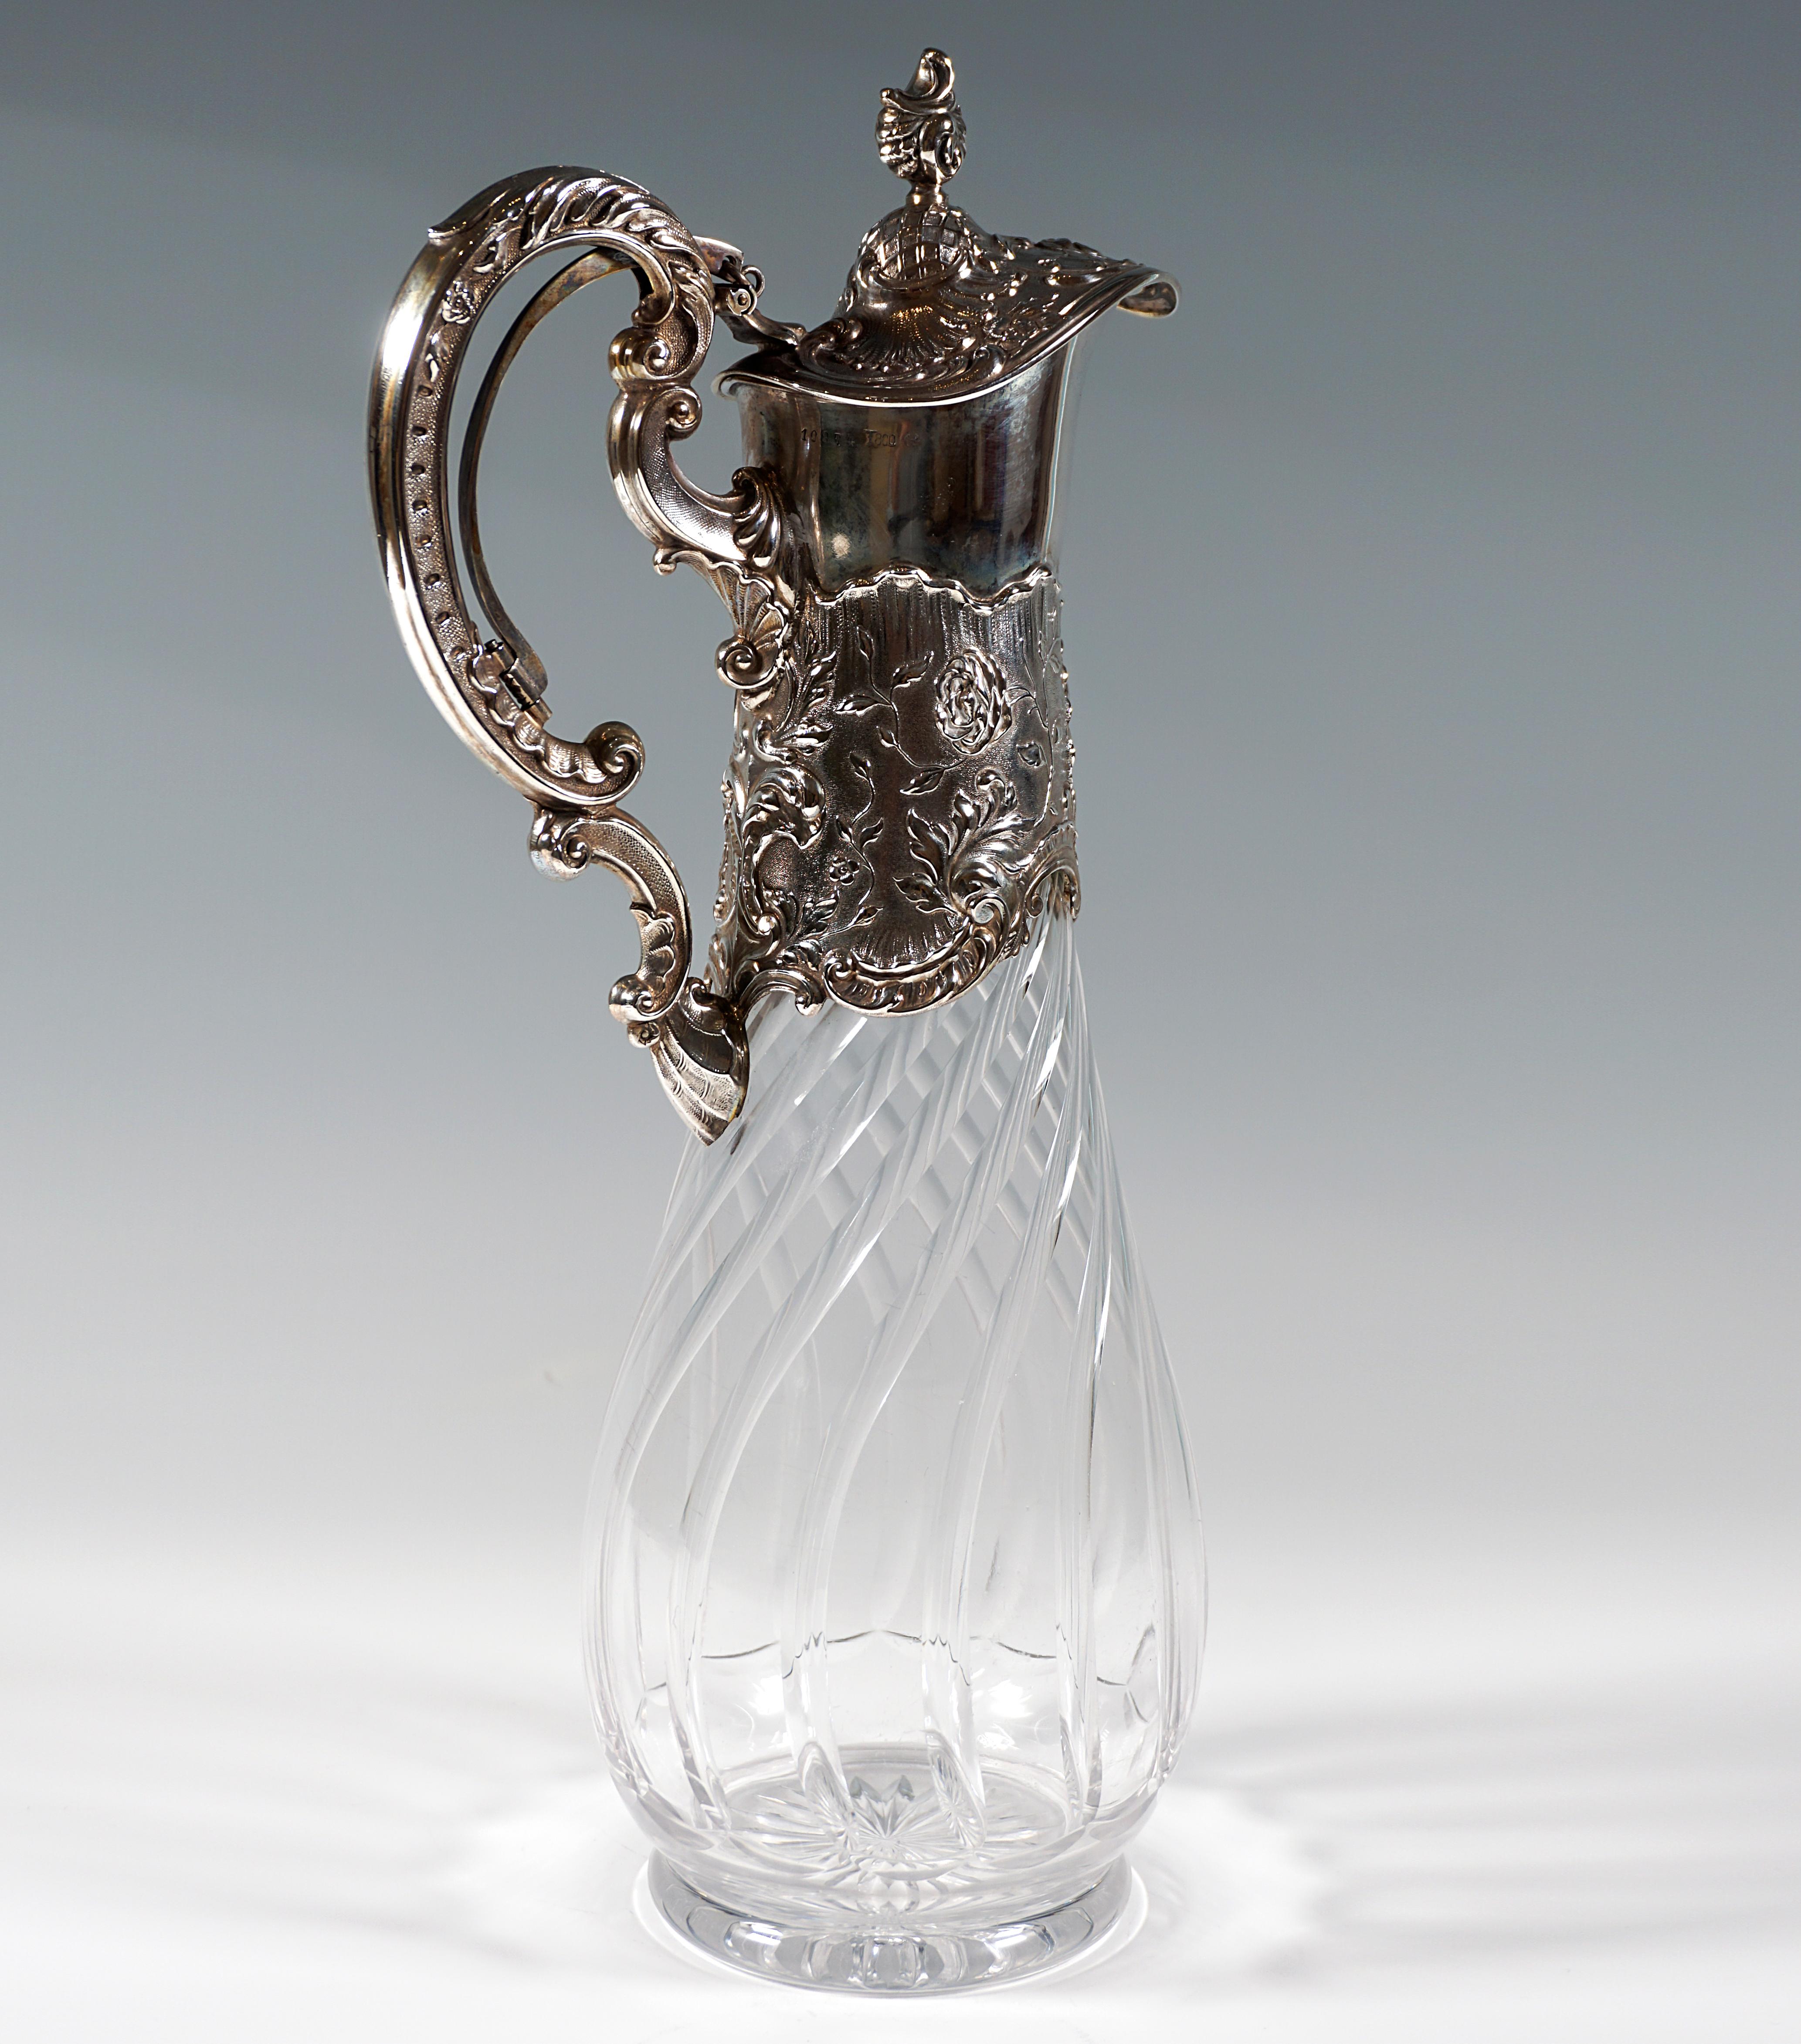 Carafe of clear glass in the shape of a slender drop on a stand ring, the wall with vertical, curved incisions, cut bottom star, the upper part of the glass body framed in silver mountings with a wide spout with lid and thumb rest, richly decorated